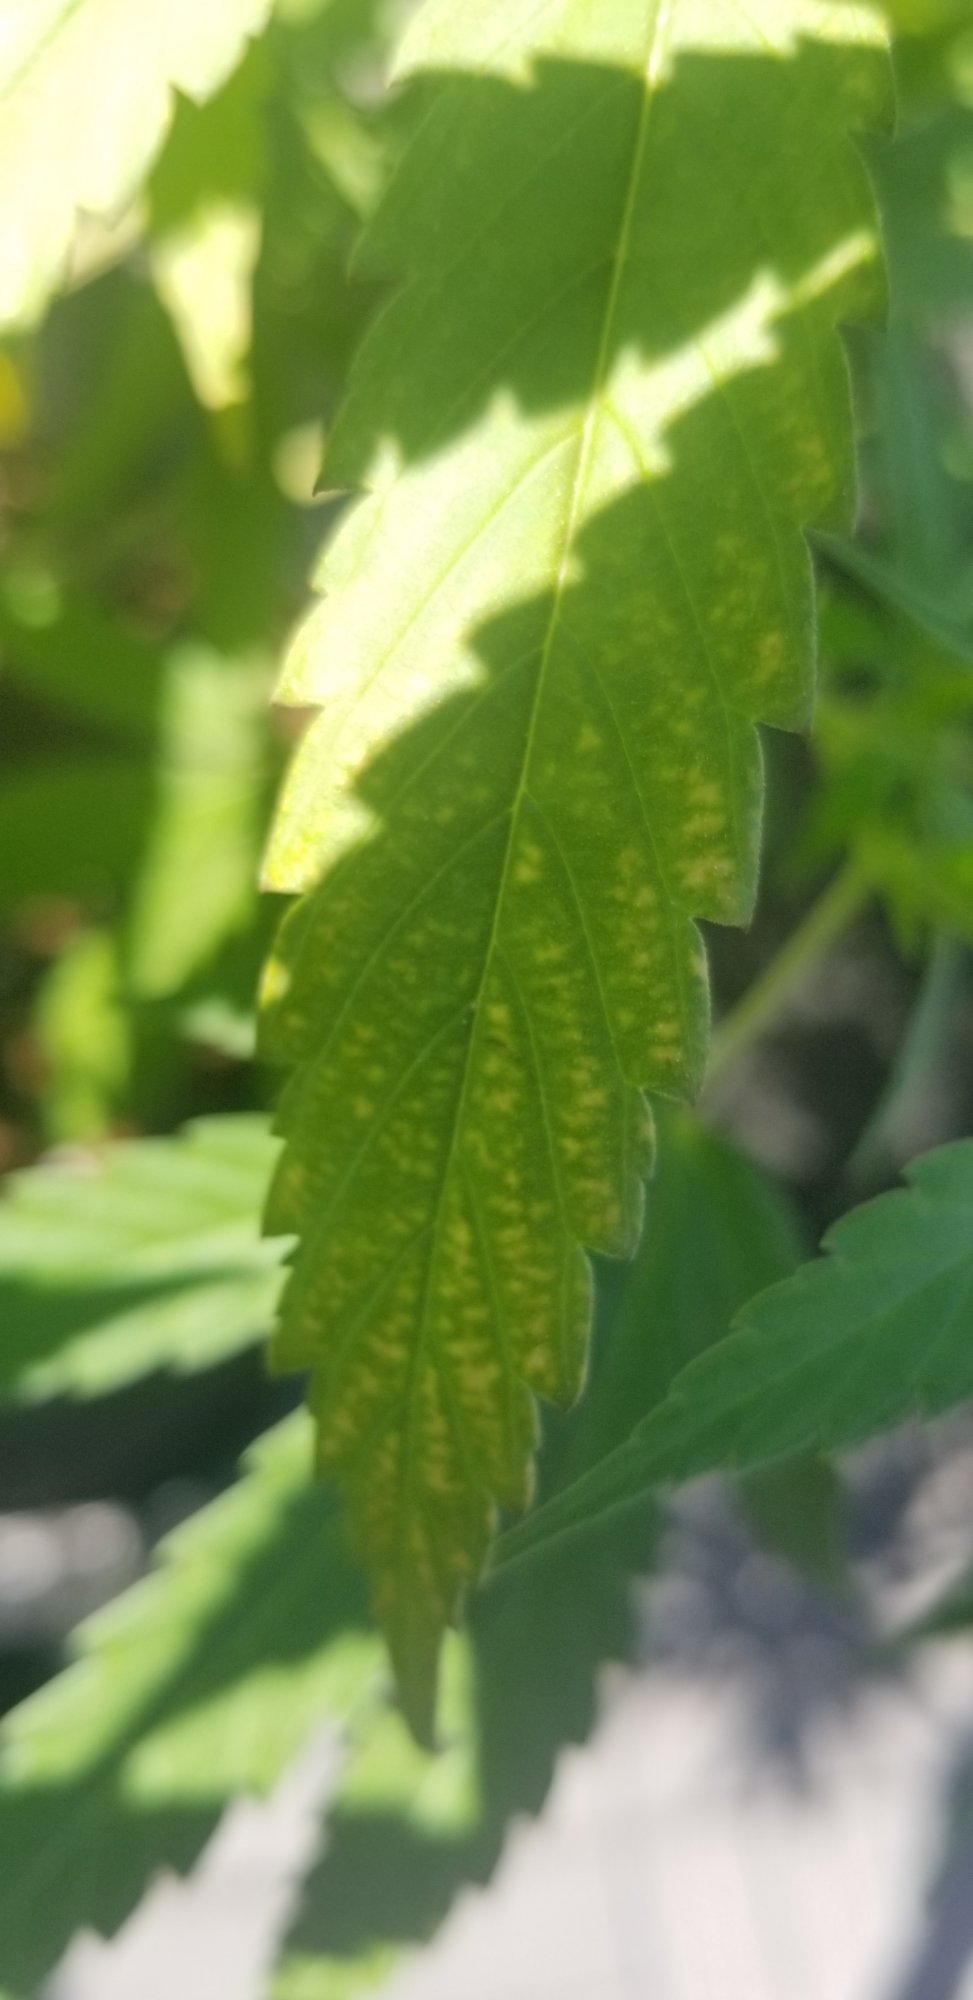 Any idea if this happening to my leaves because of a deficiency or pest 2